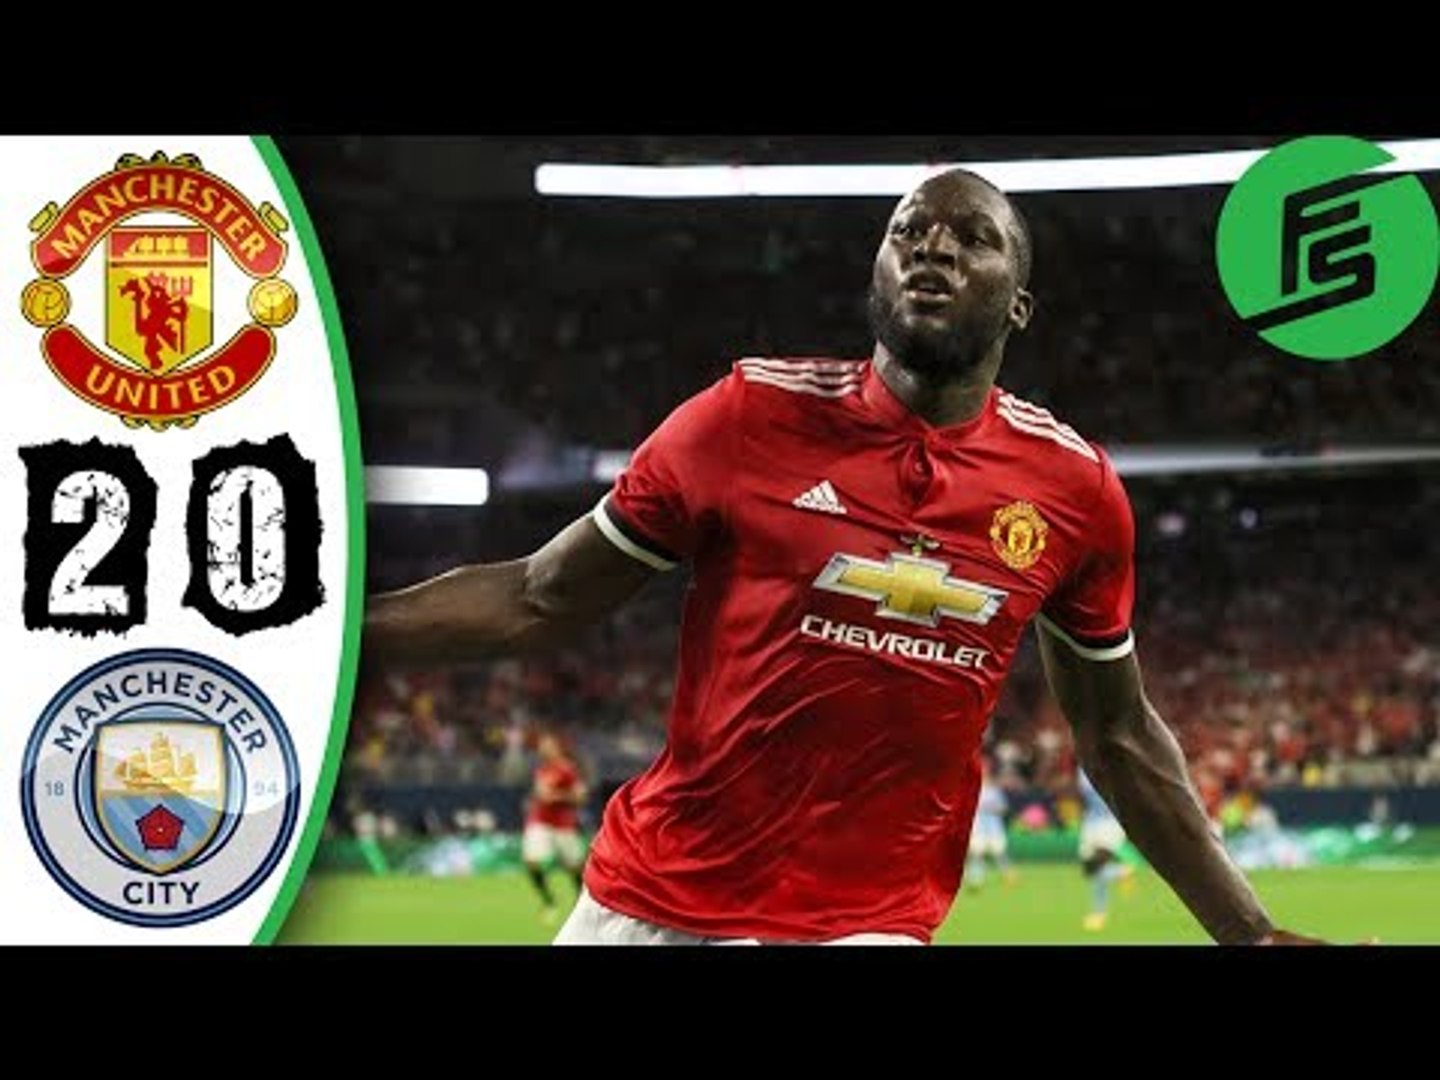 Manchester United vs Manchester City 2-0 - Highlights and Goals - 20 July 2017